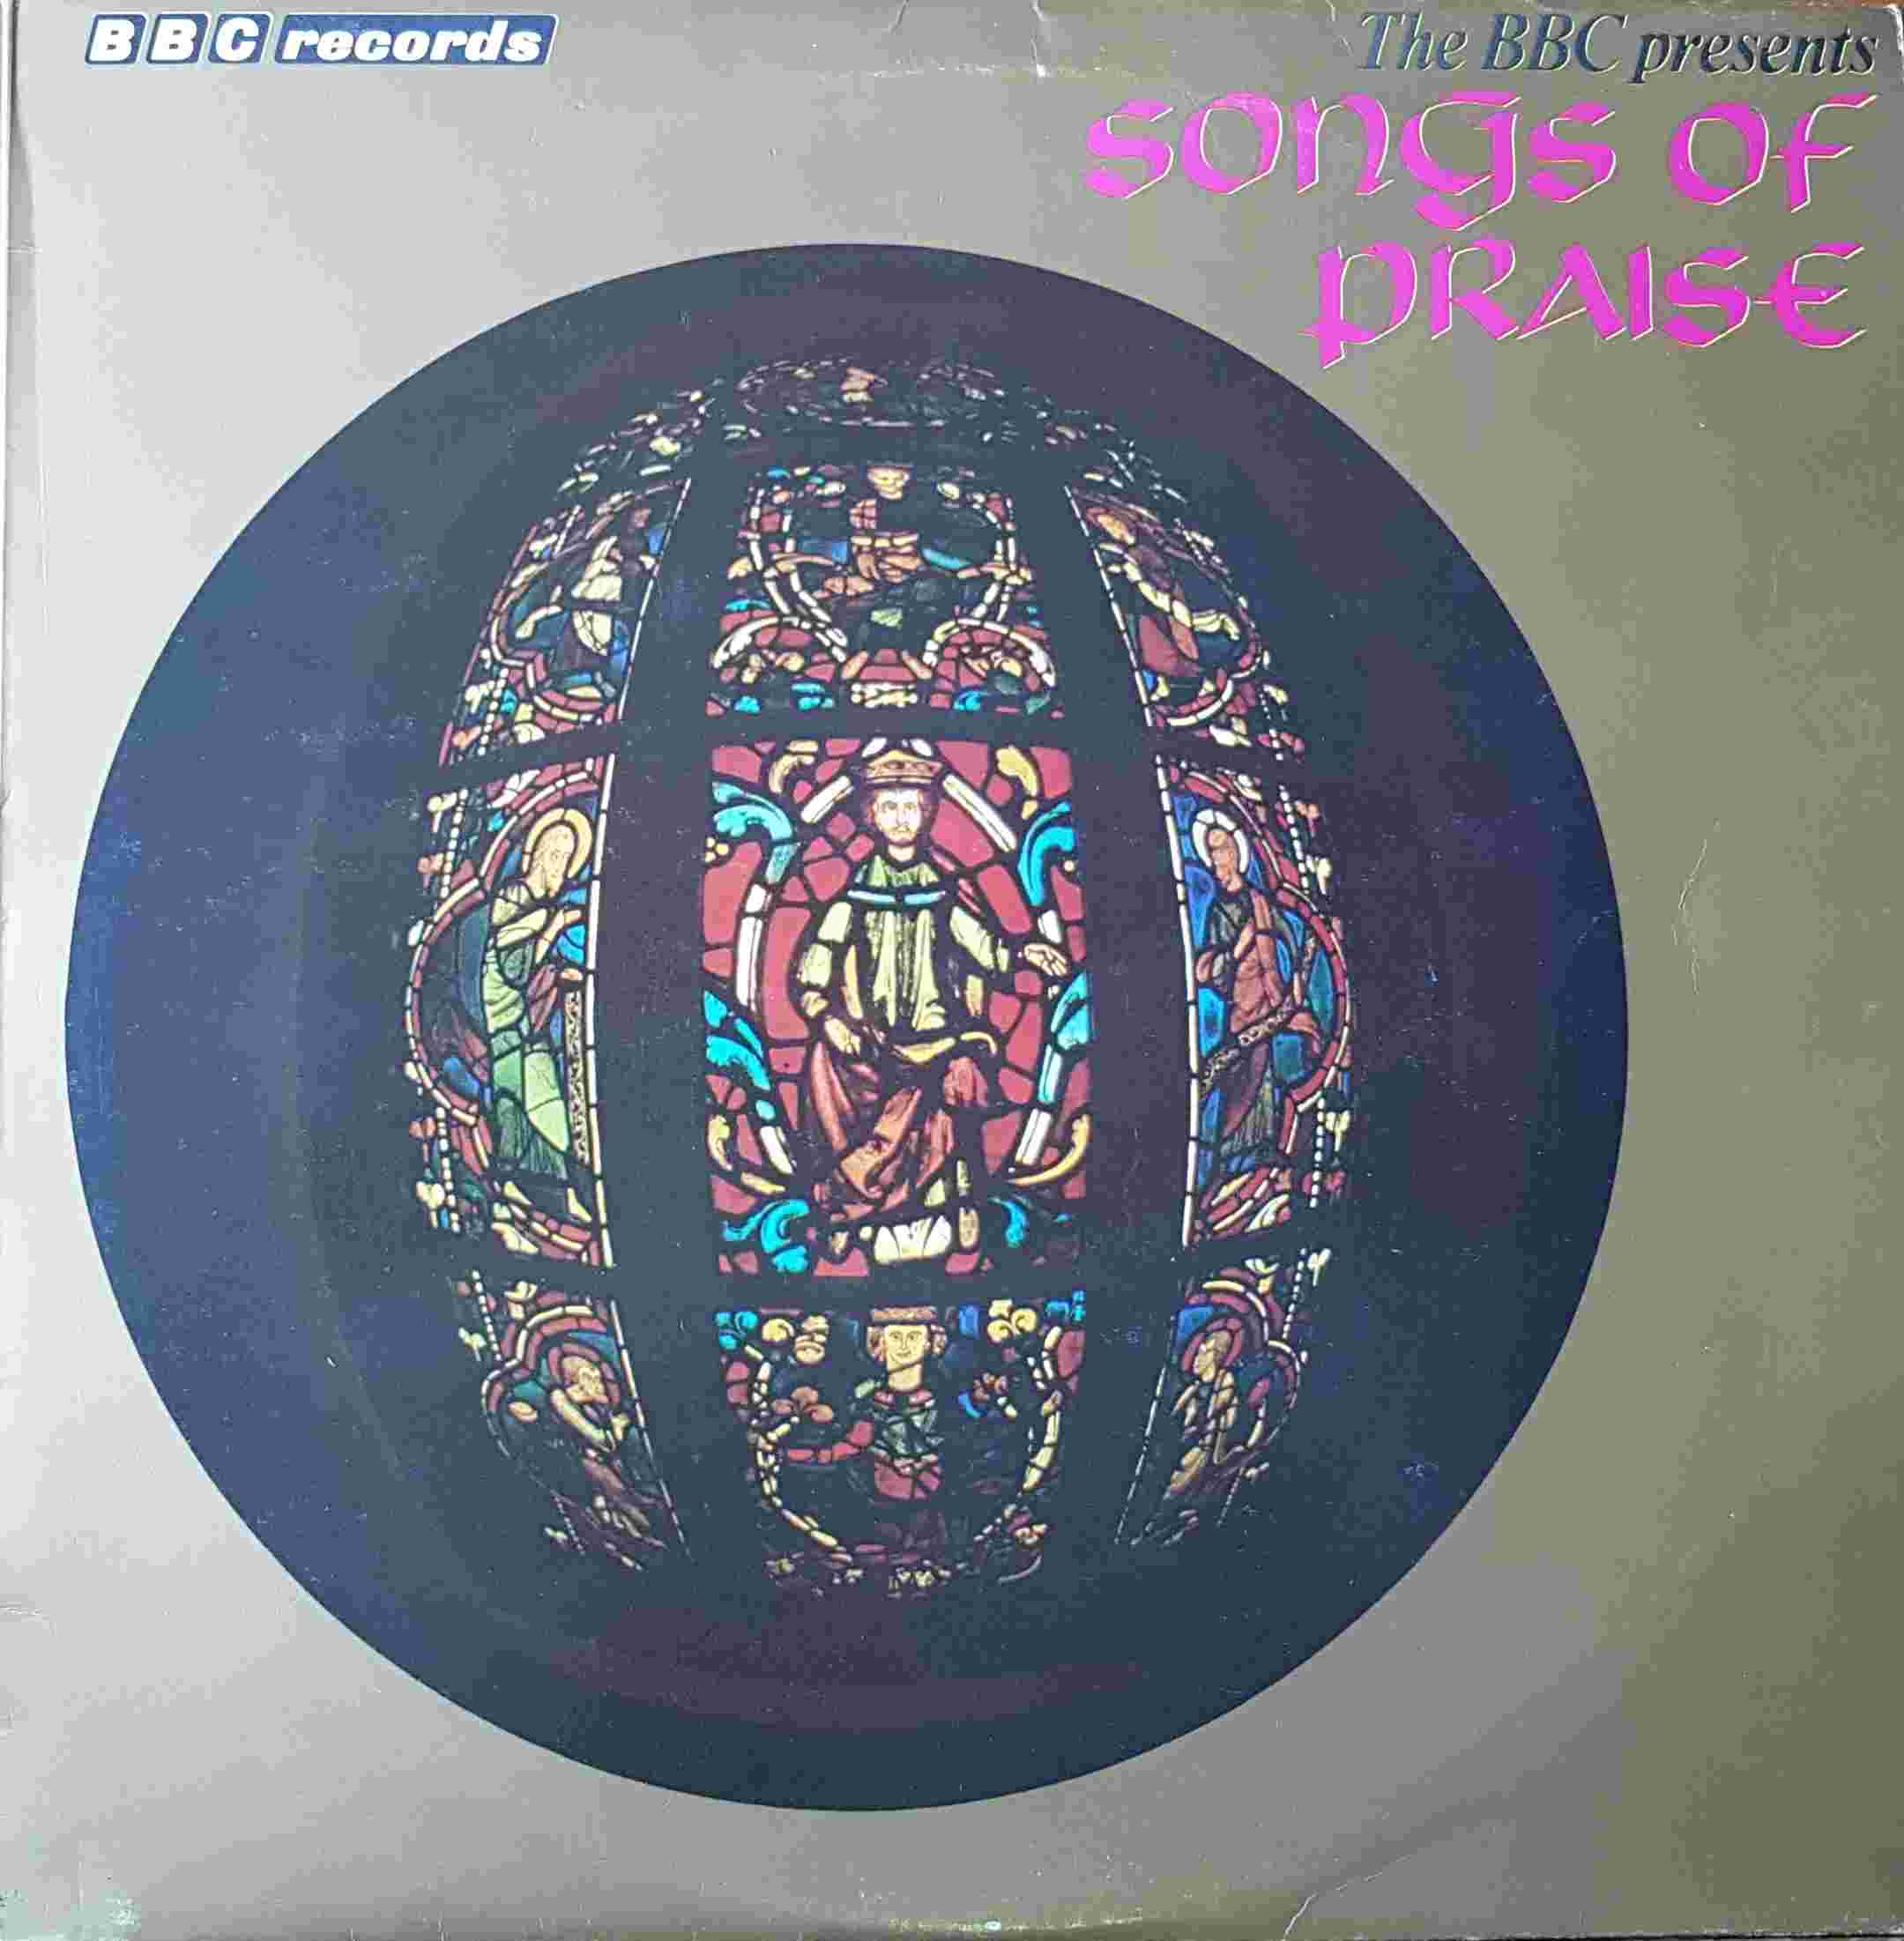 Picture of REC 141 Songs of praise by artist Various from the BBC albums - Records and Tapes library